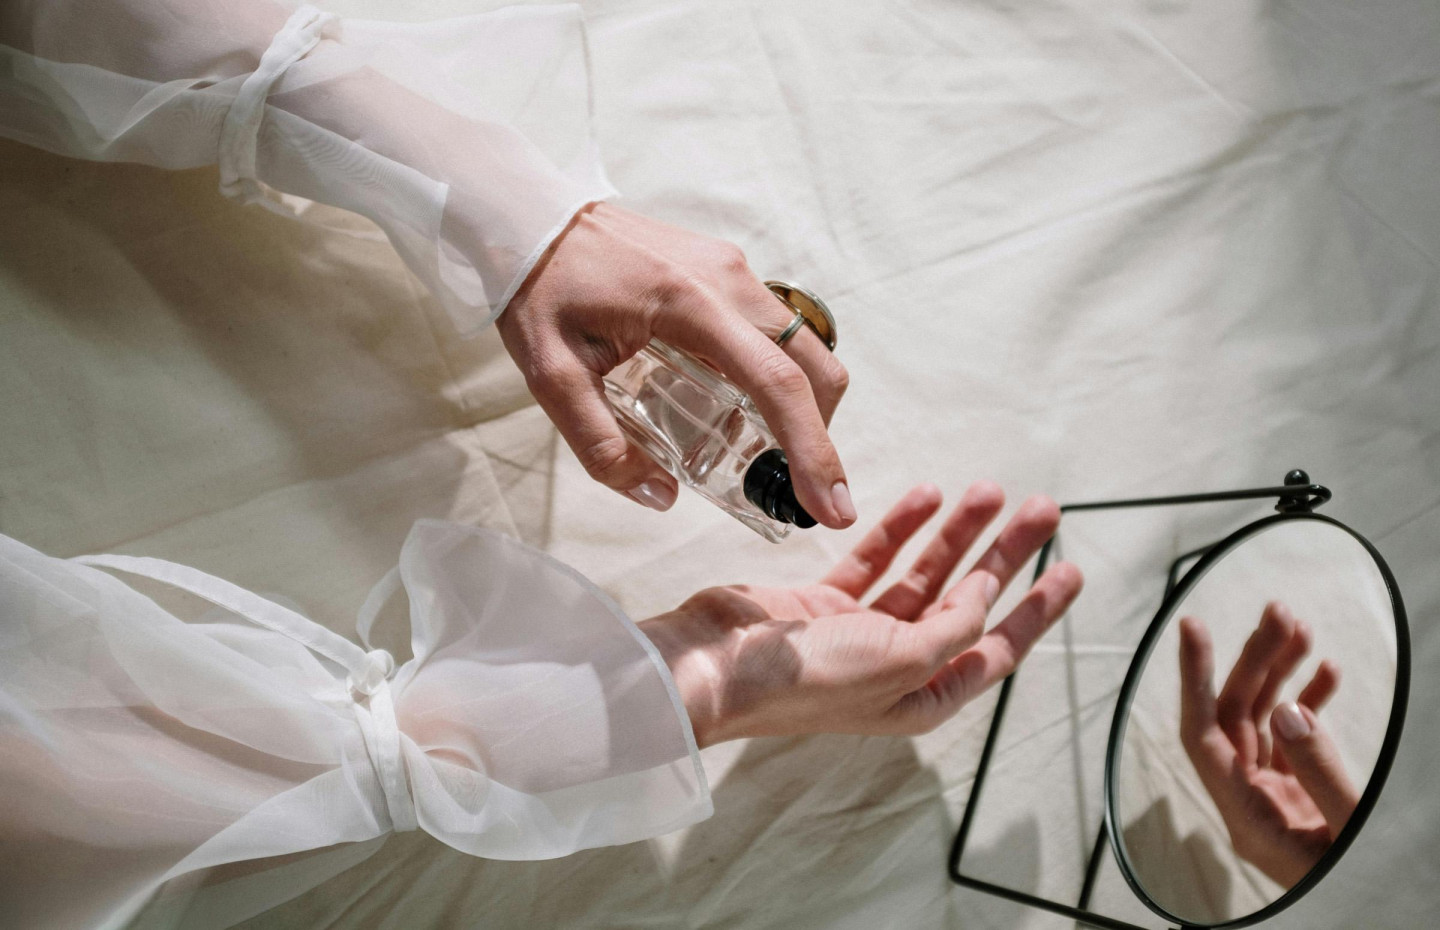 Wrists, hair, clothes: where to apply perfume to make the scent last longer